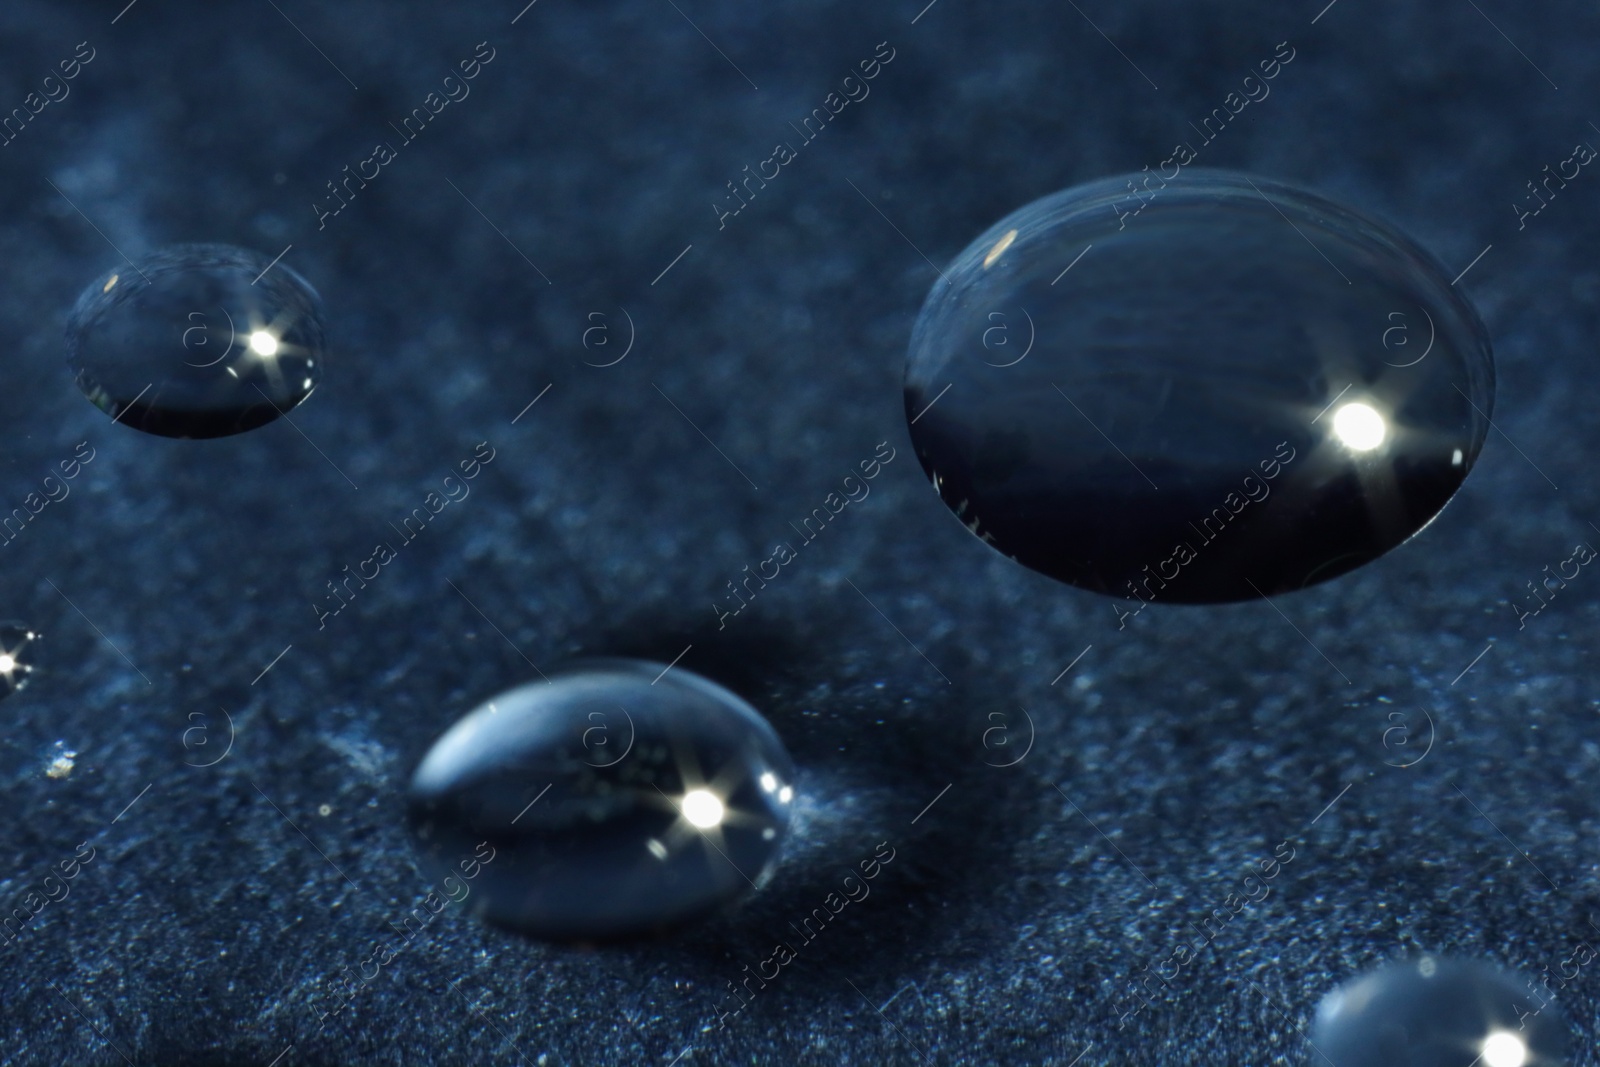 Photo of Water drops on glass against dark gray textured background. Macro photography